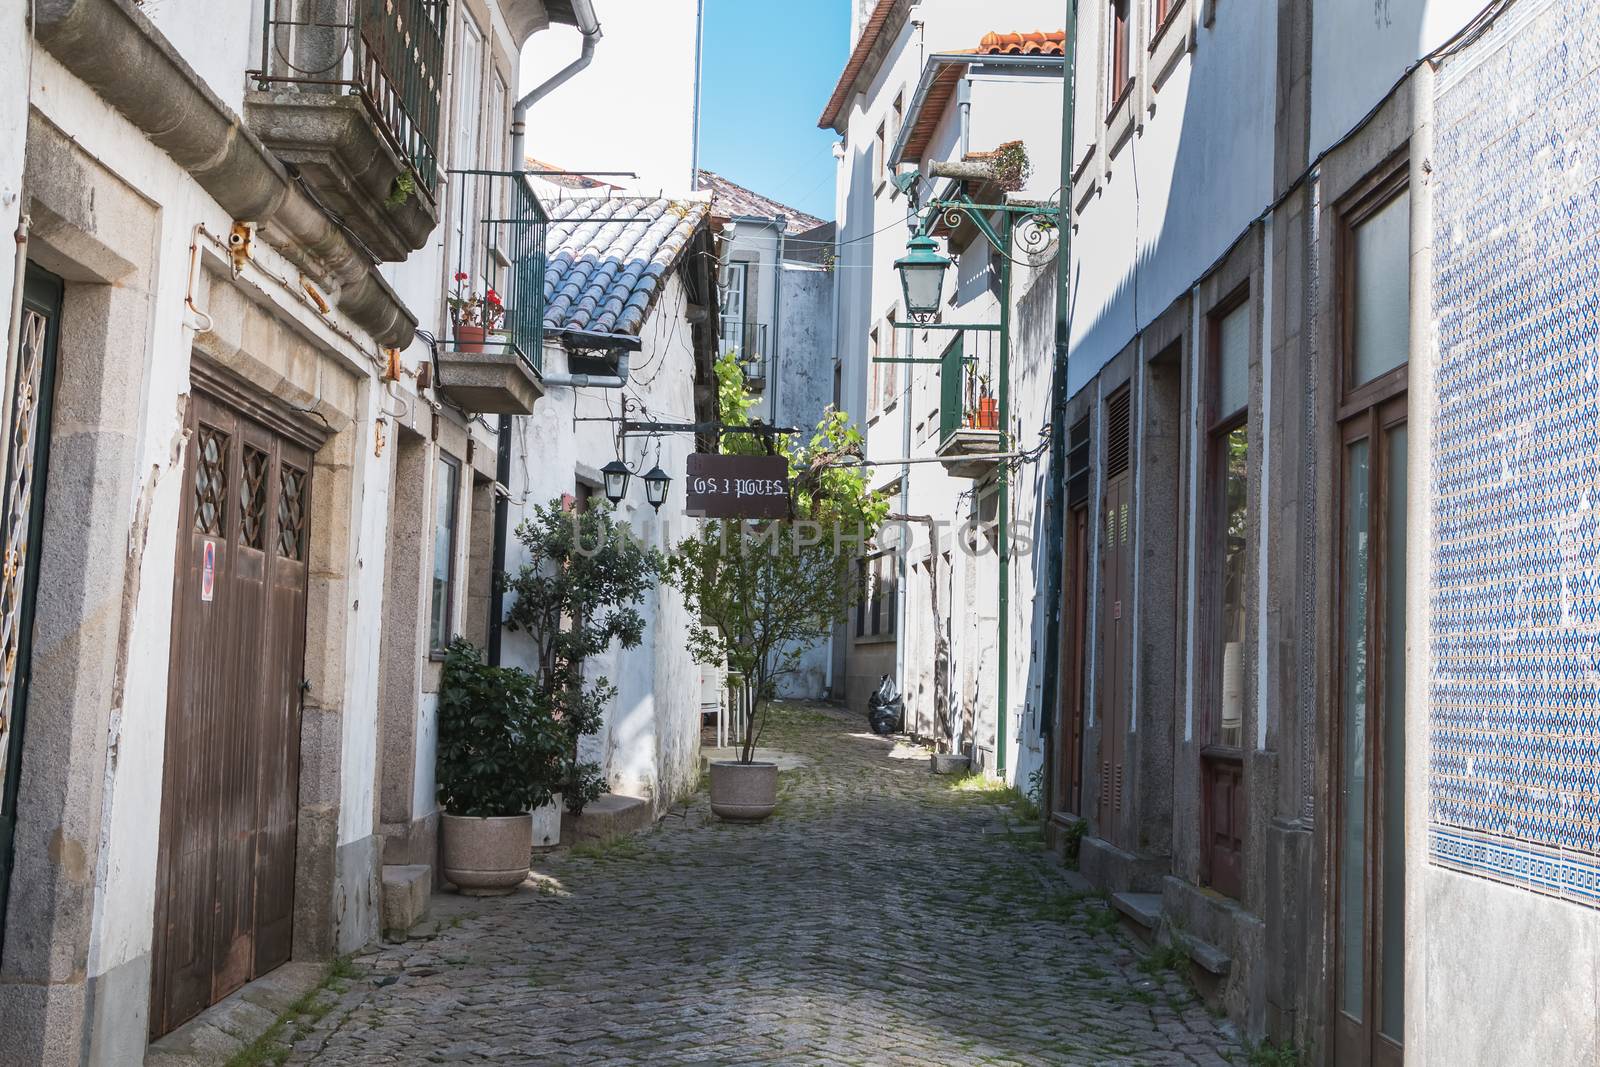 Architecture detail of typical houses and shops in viana do cast by AtlanticEUROSTOXX